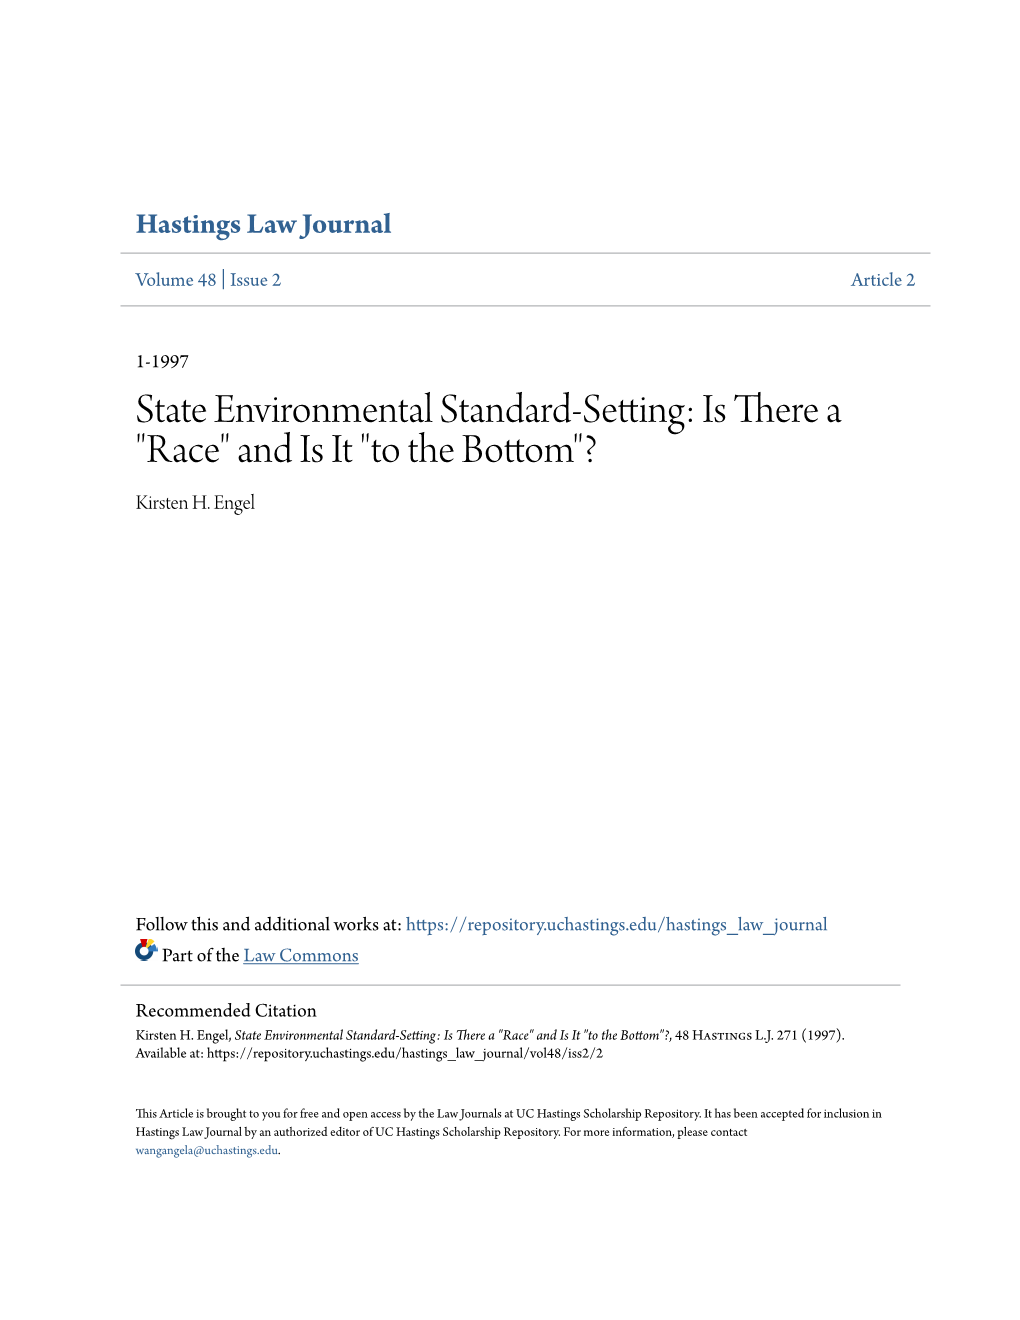 State Environmental Standard-Setting: Is There a "Race" and Is It "To the Bottom"? Kirsten H